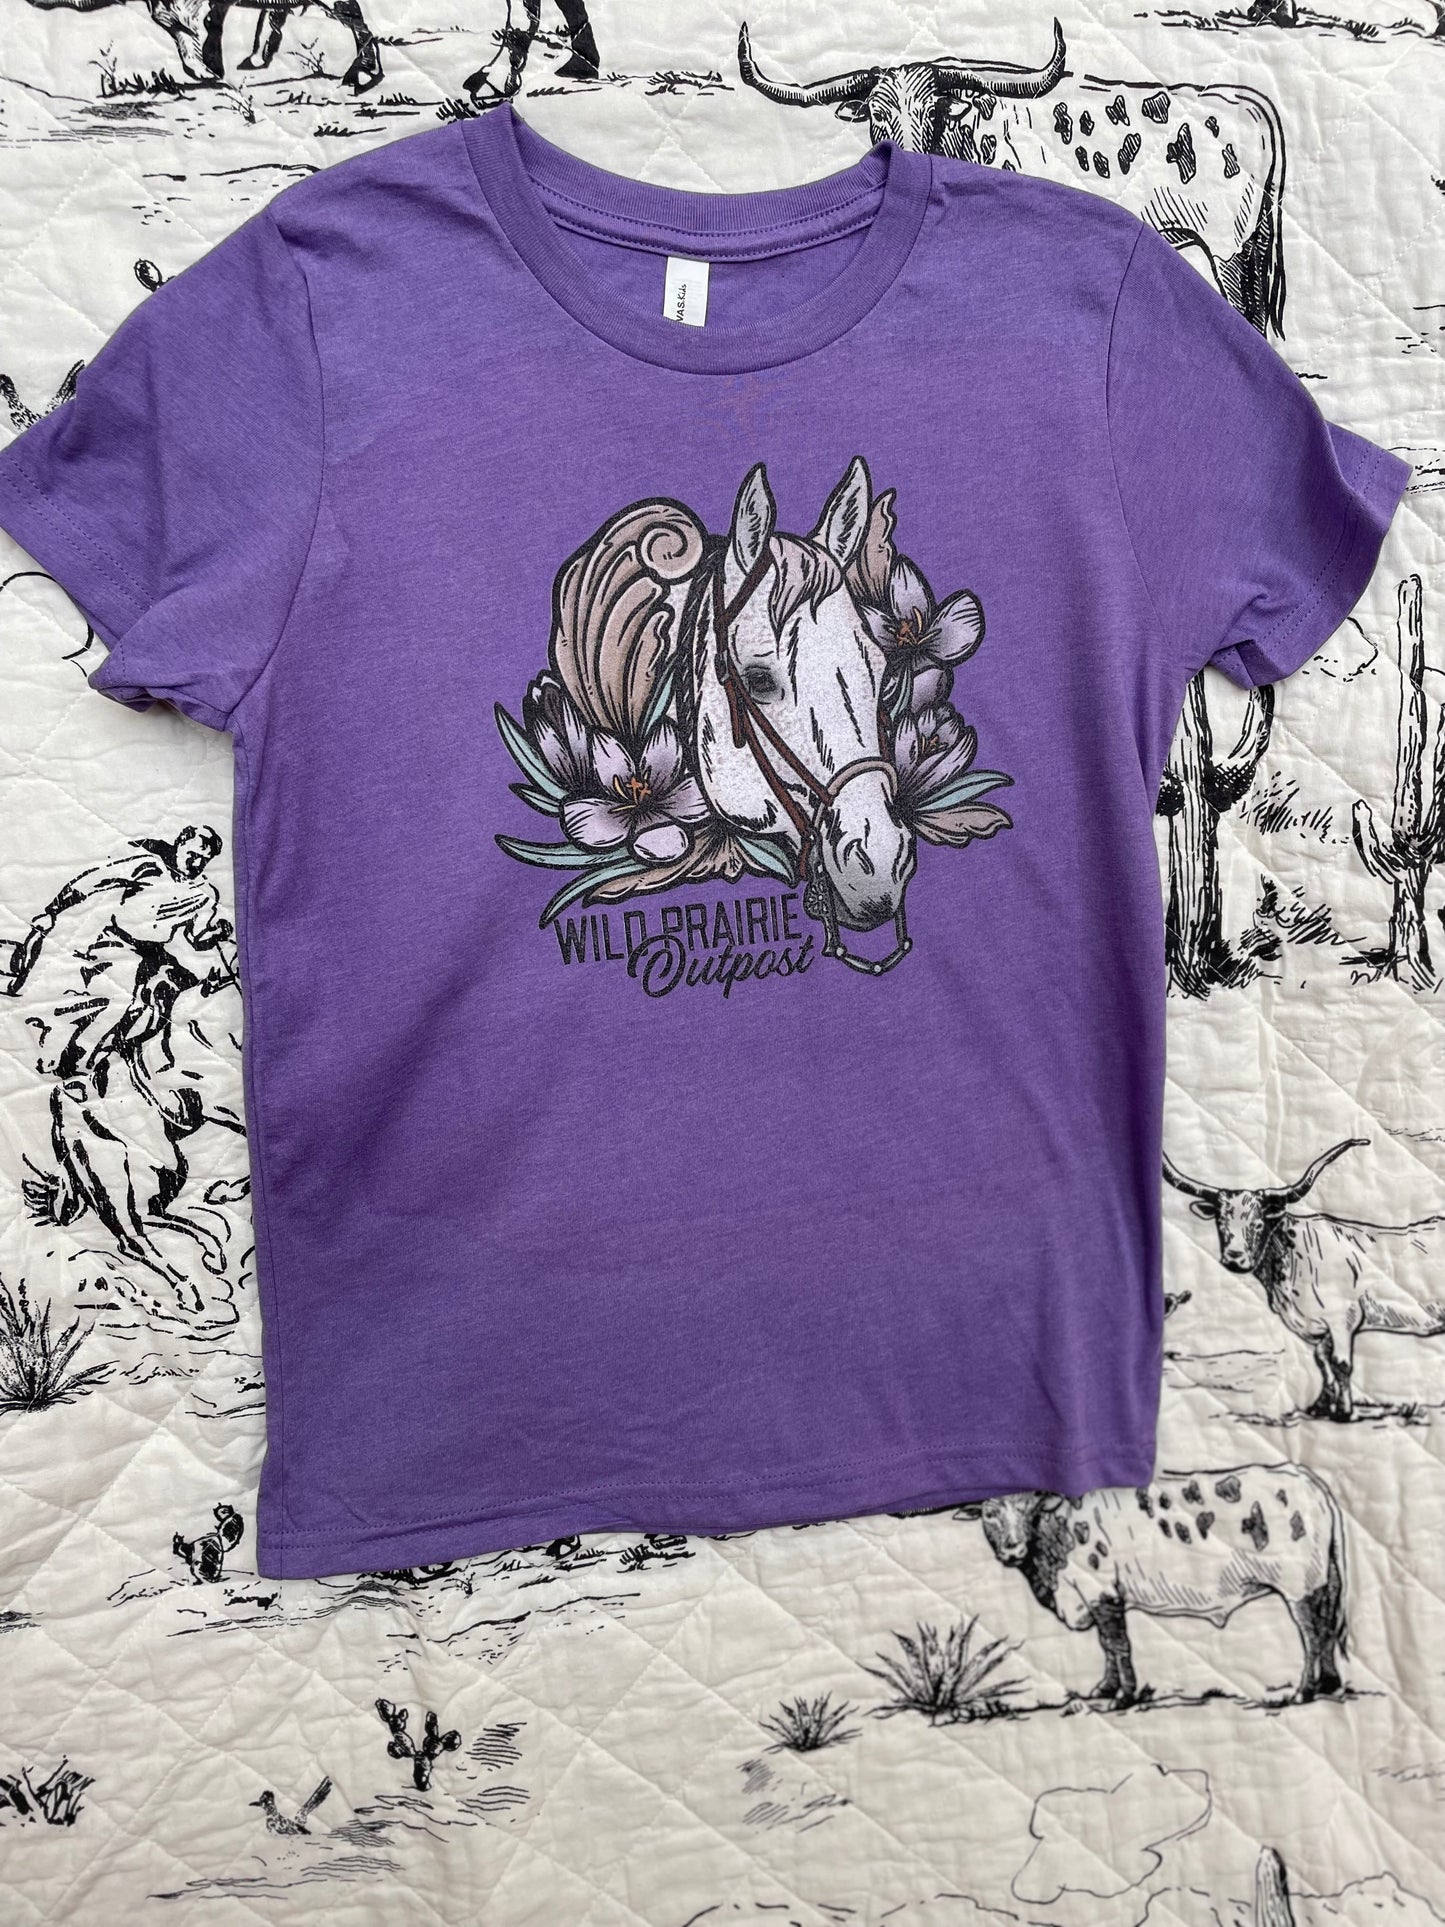 Wild Prairie logo for kids youth toddlers